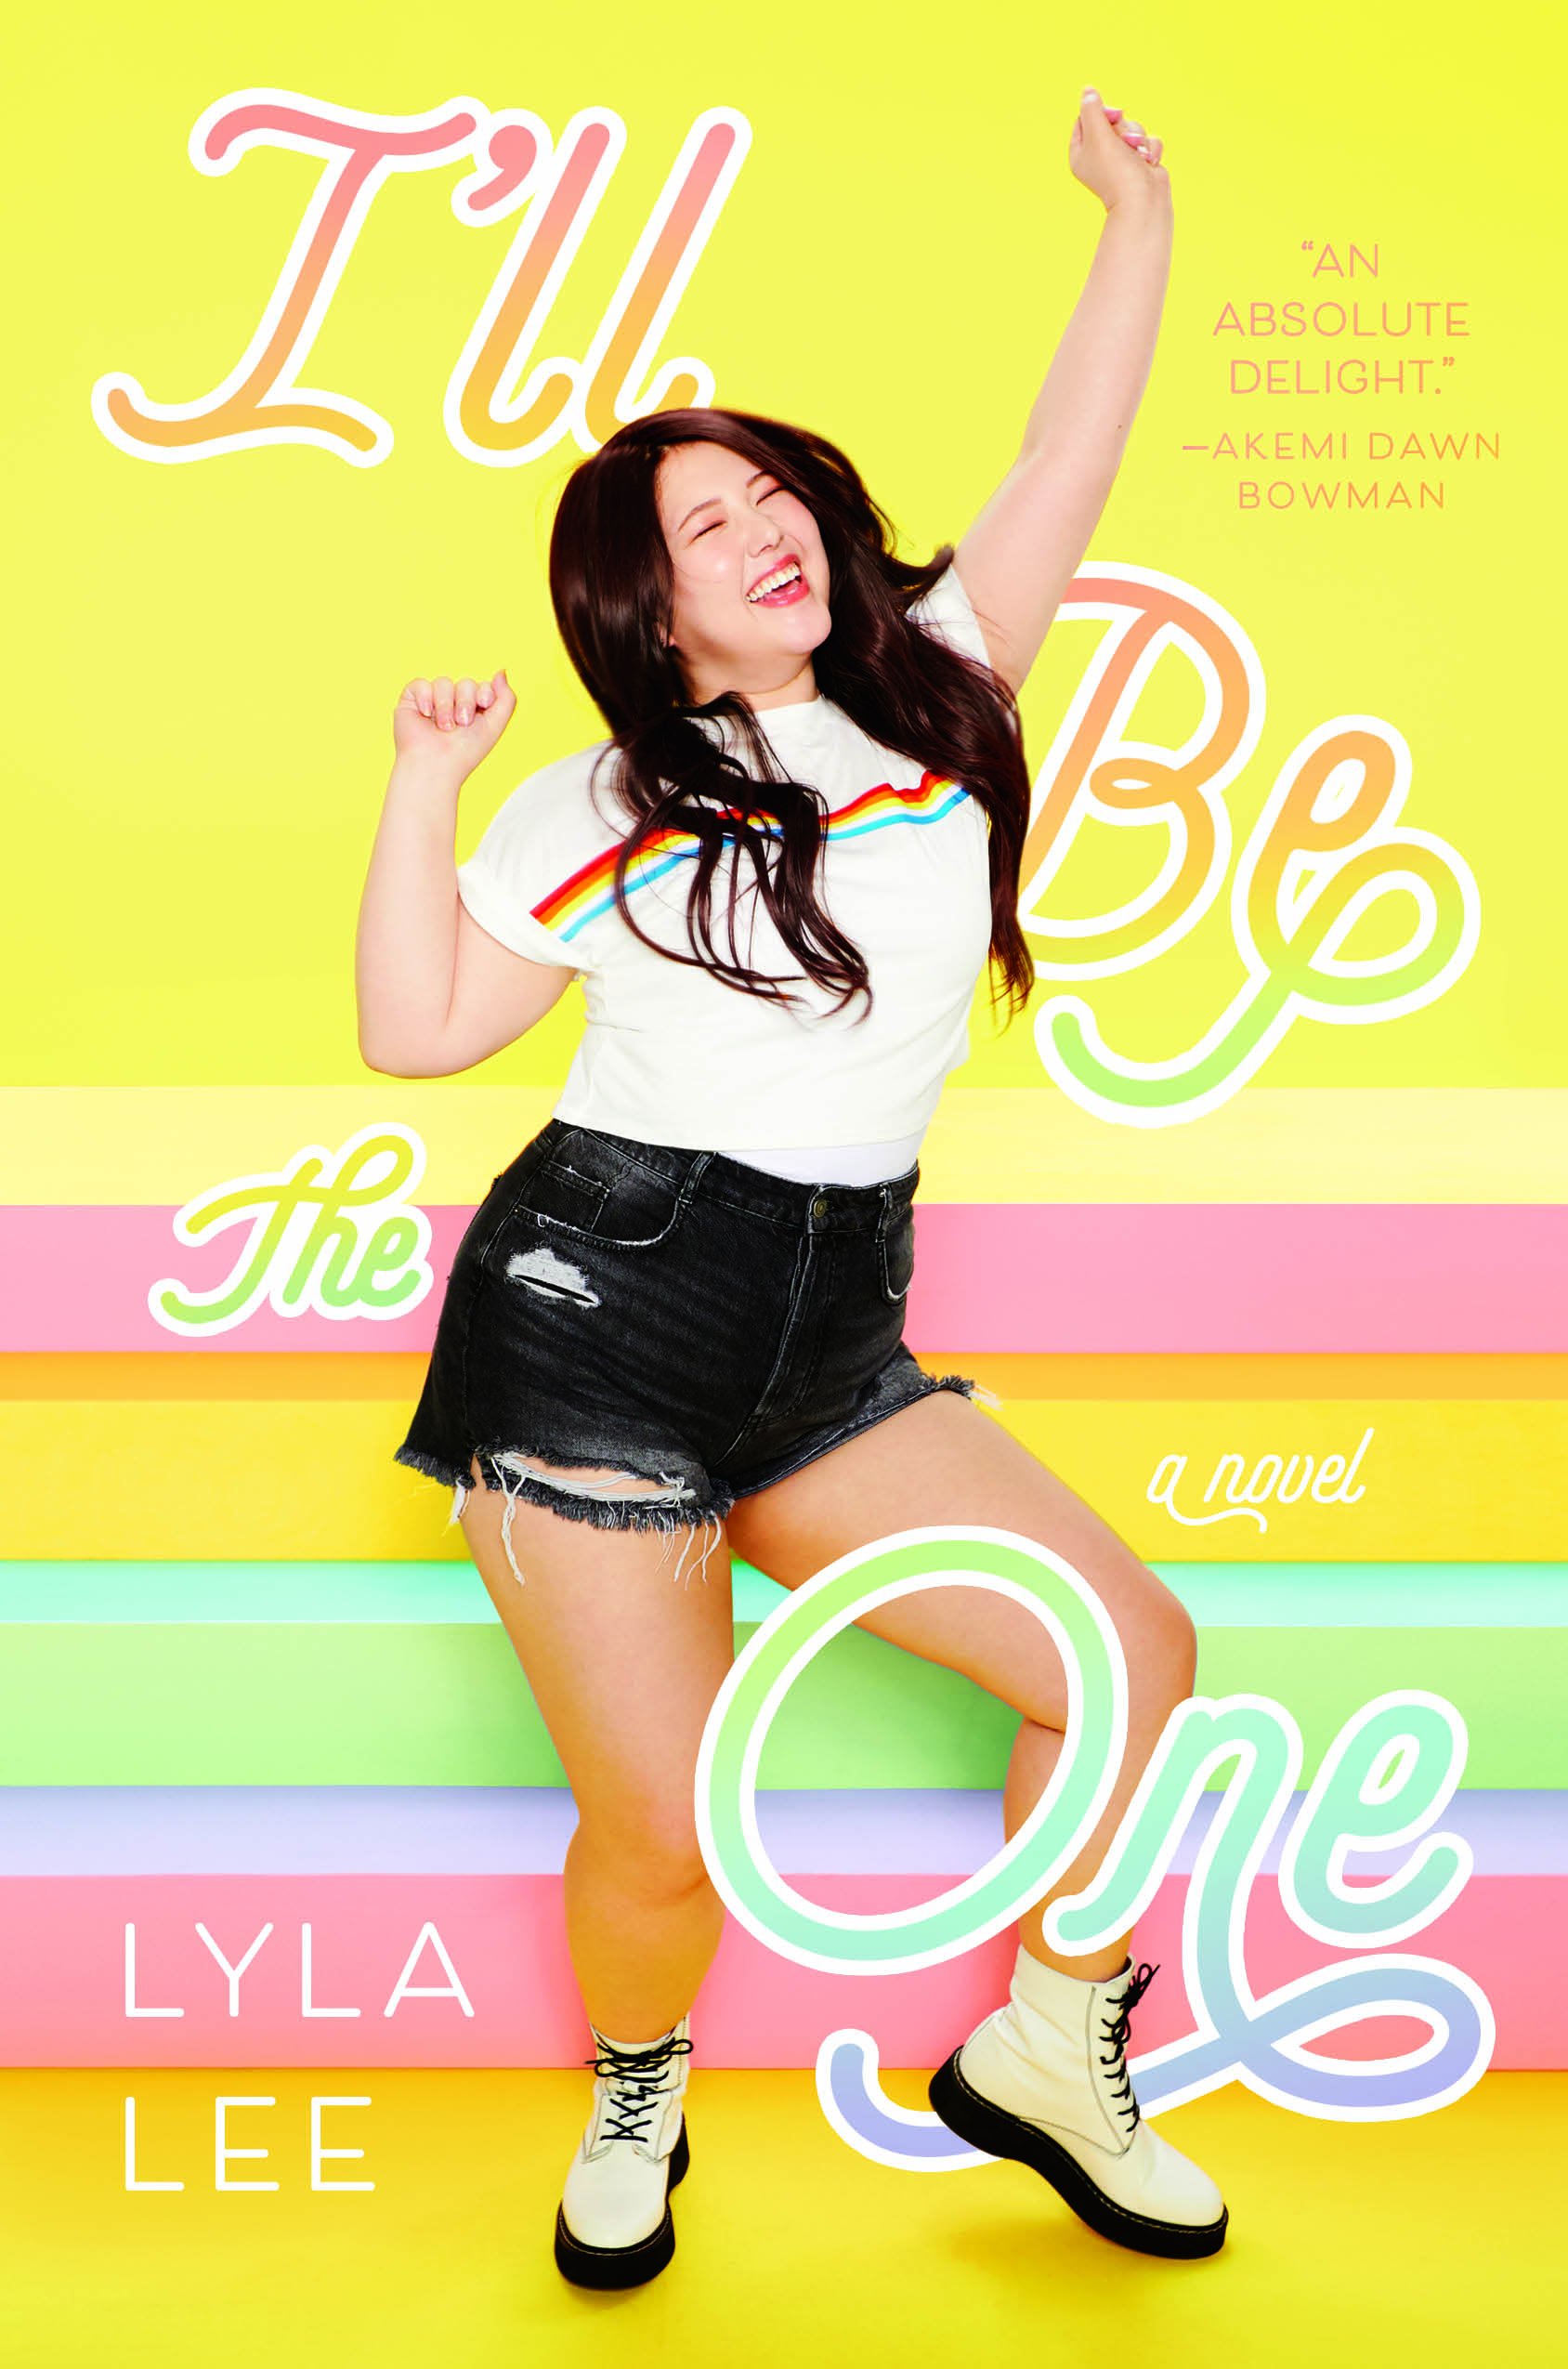 I'll be the one by Lyla Lee